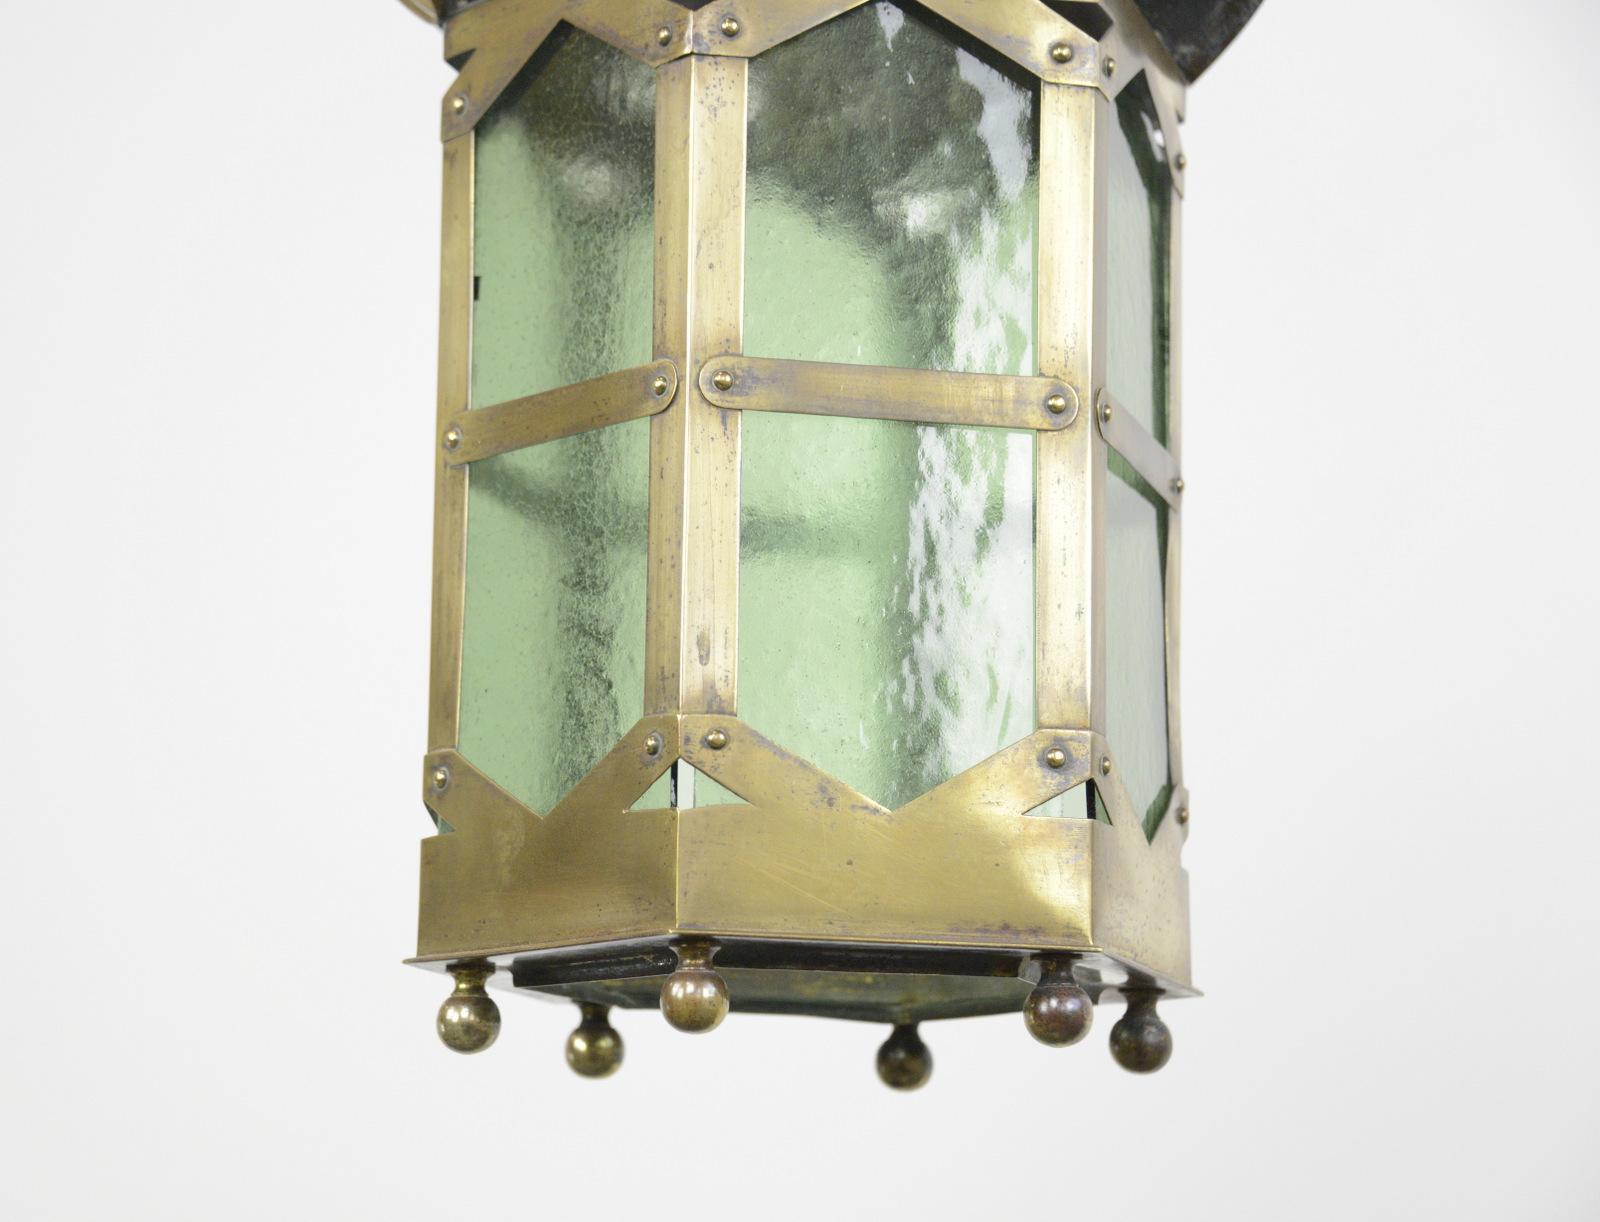 Arts & Crafts hallway lantern, circa 1900

- Fluted brass top
- Original bottle green glass
- Takes B22 fitting bulbs
- Comes with original brass chain
- English, 1900
- Measures: 50 cm tall x 30 cm wide 

Condition report

Fully re wired